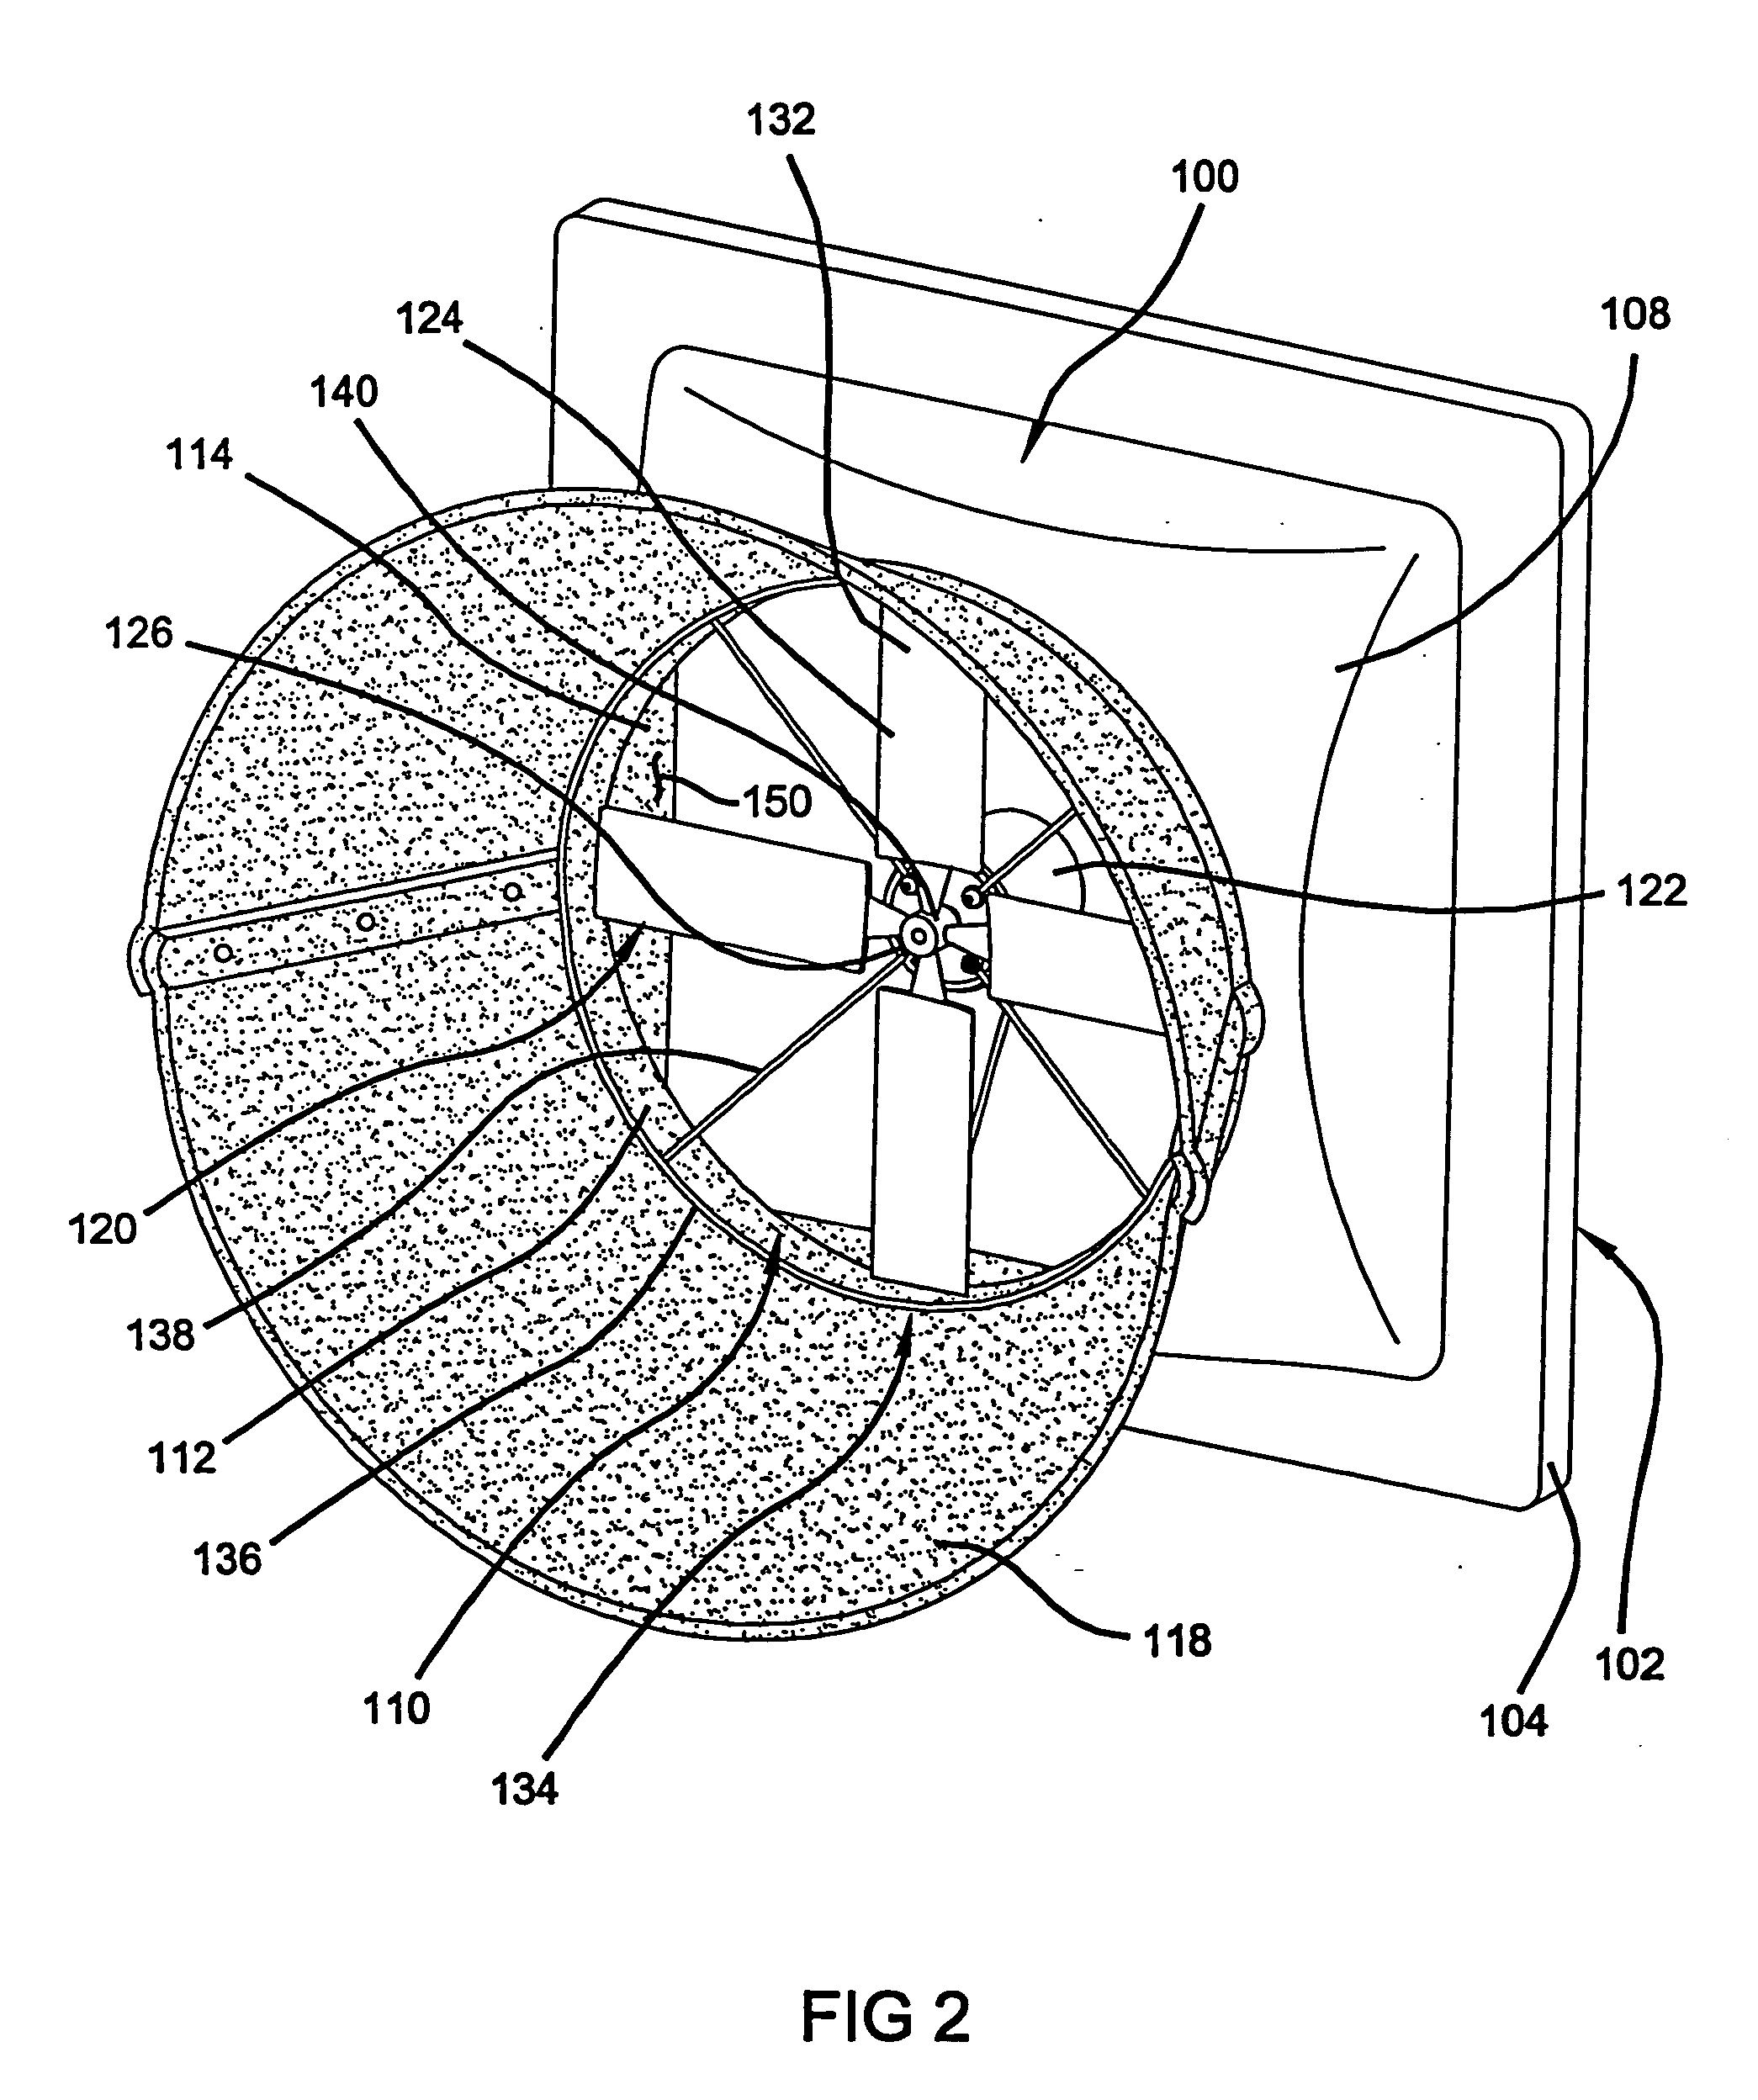 Method for enhancing poultry production